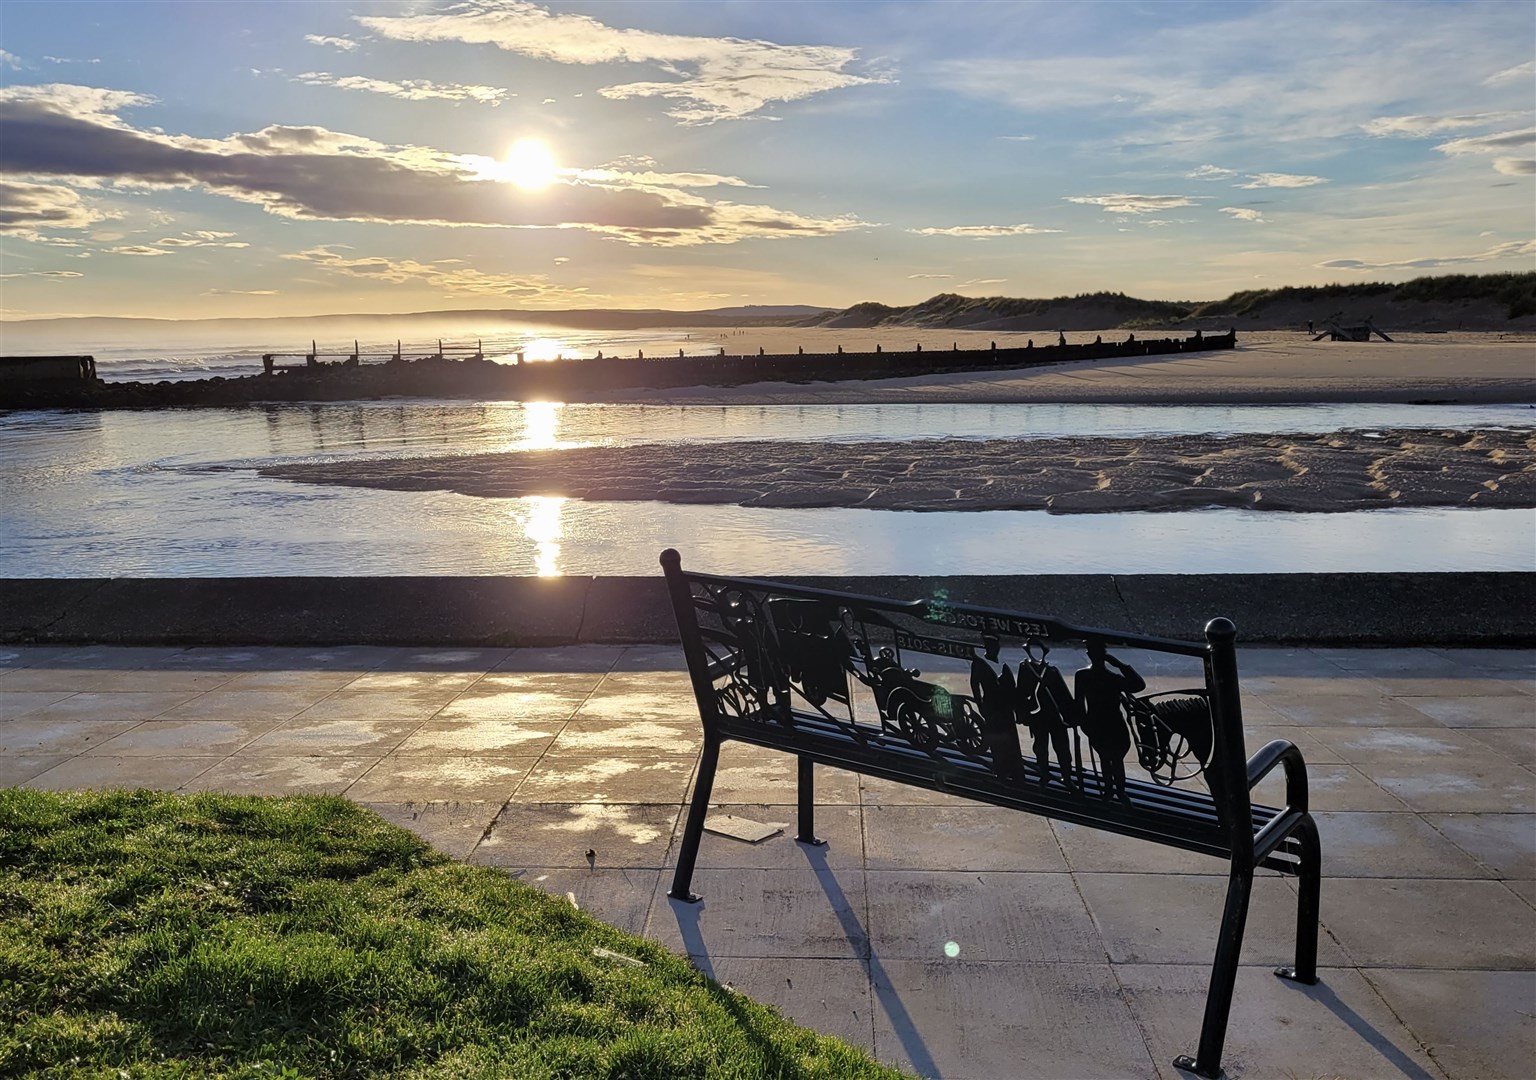 Reader Hazel Thomson enjoyed a trip to Lossiemouth, where she snapped these photographs.